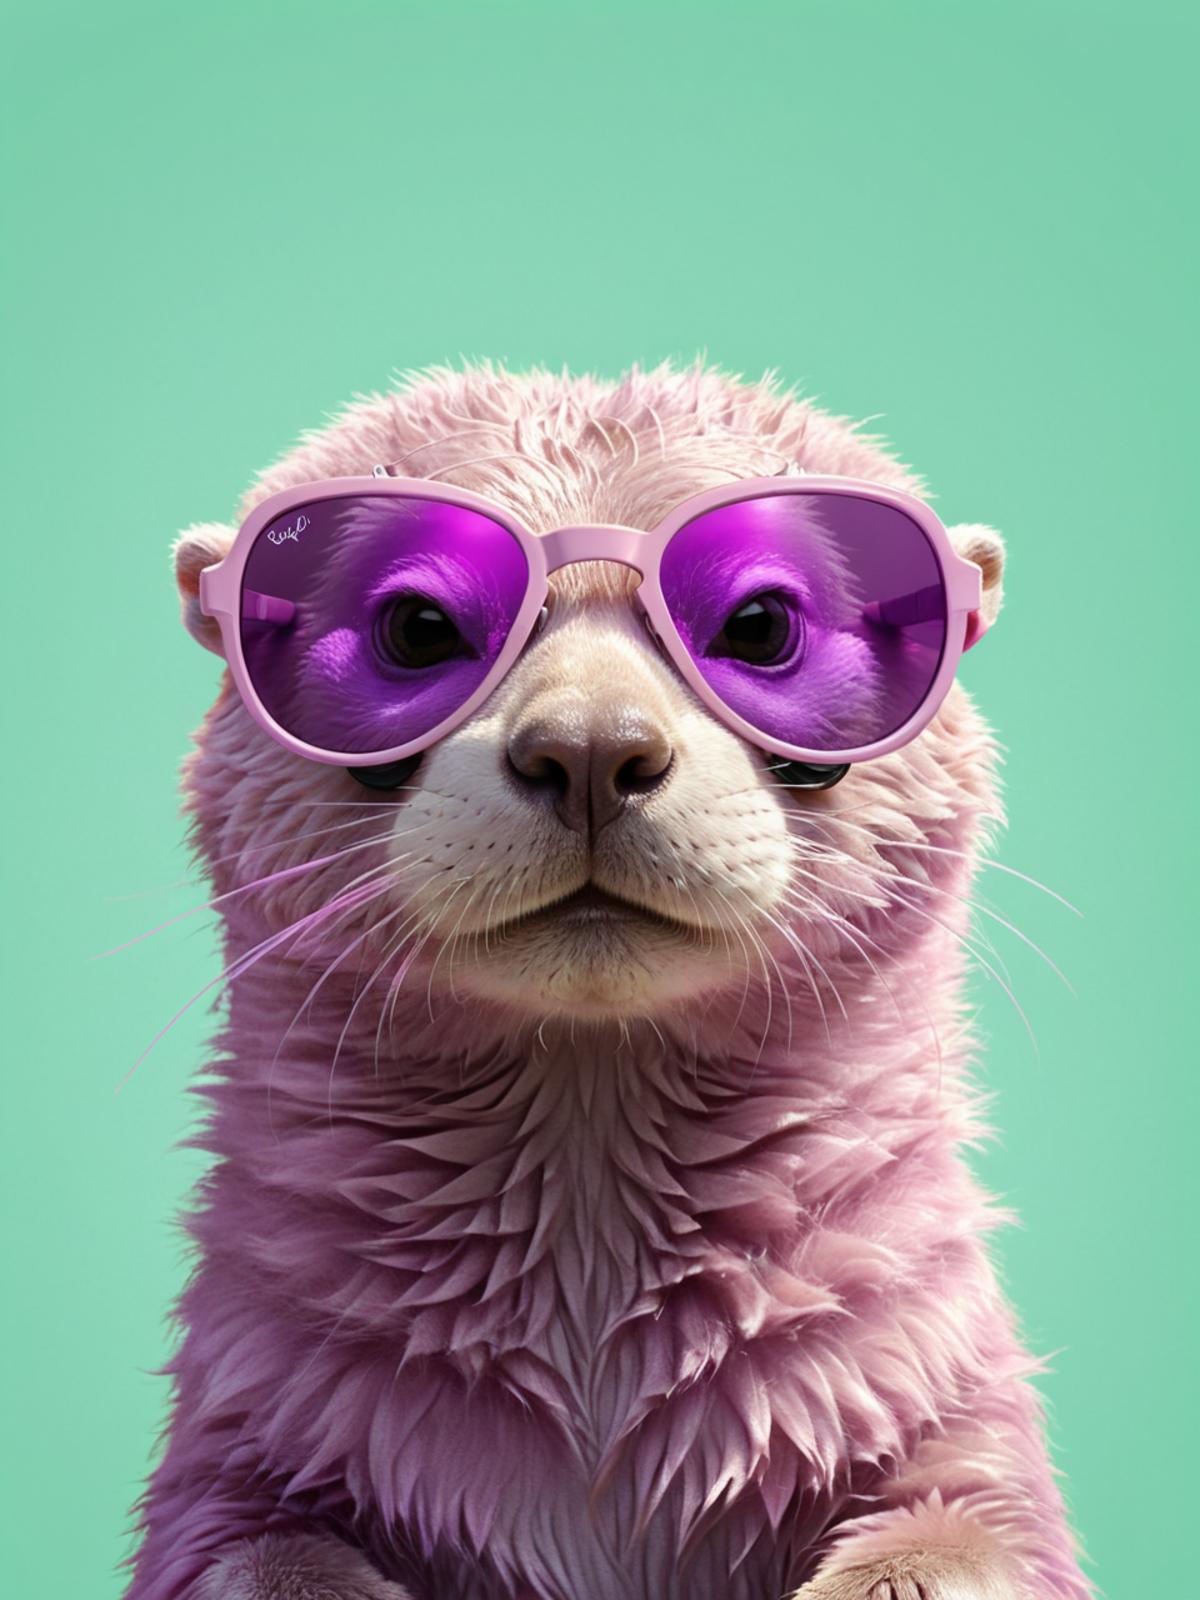 Portrait of a cute fluffy pink otter wearing large sunglasses, colorful, centre image, clean borders, symmetry, symmetrica...